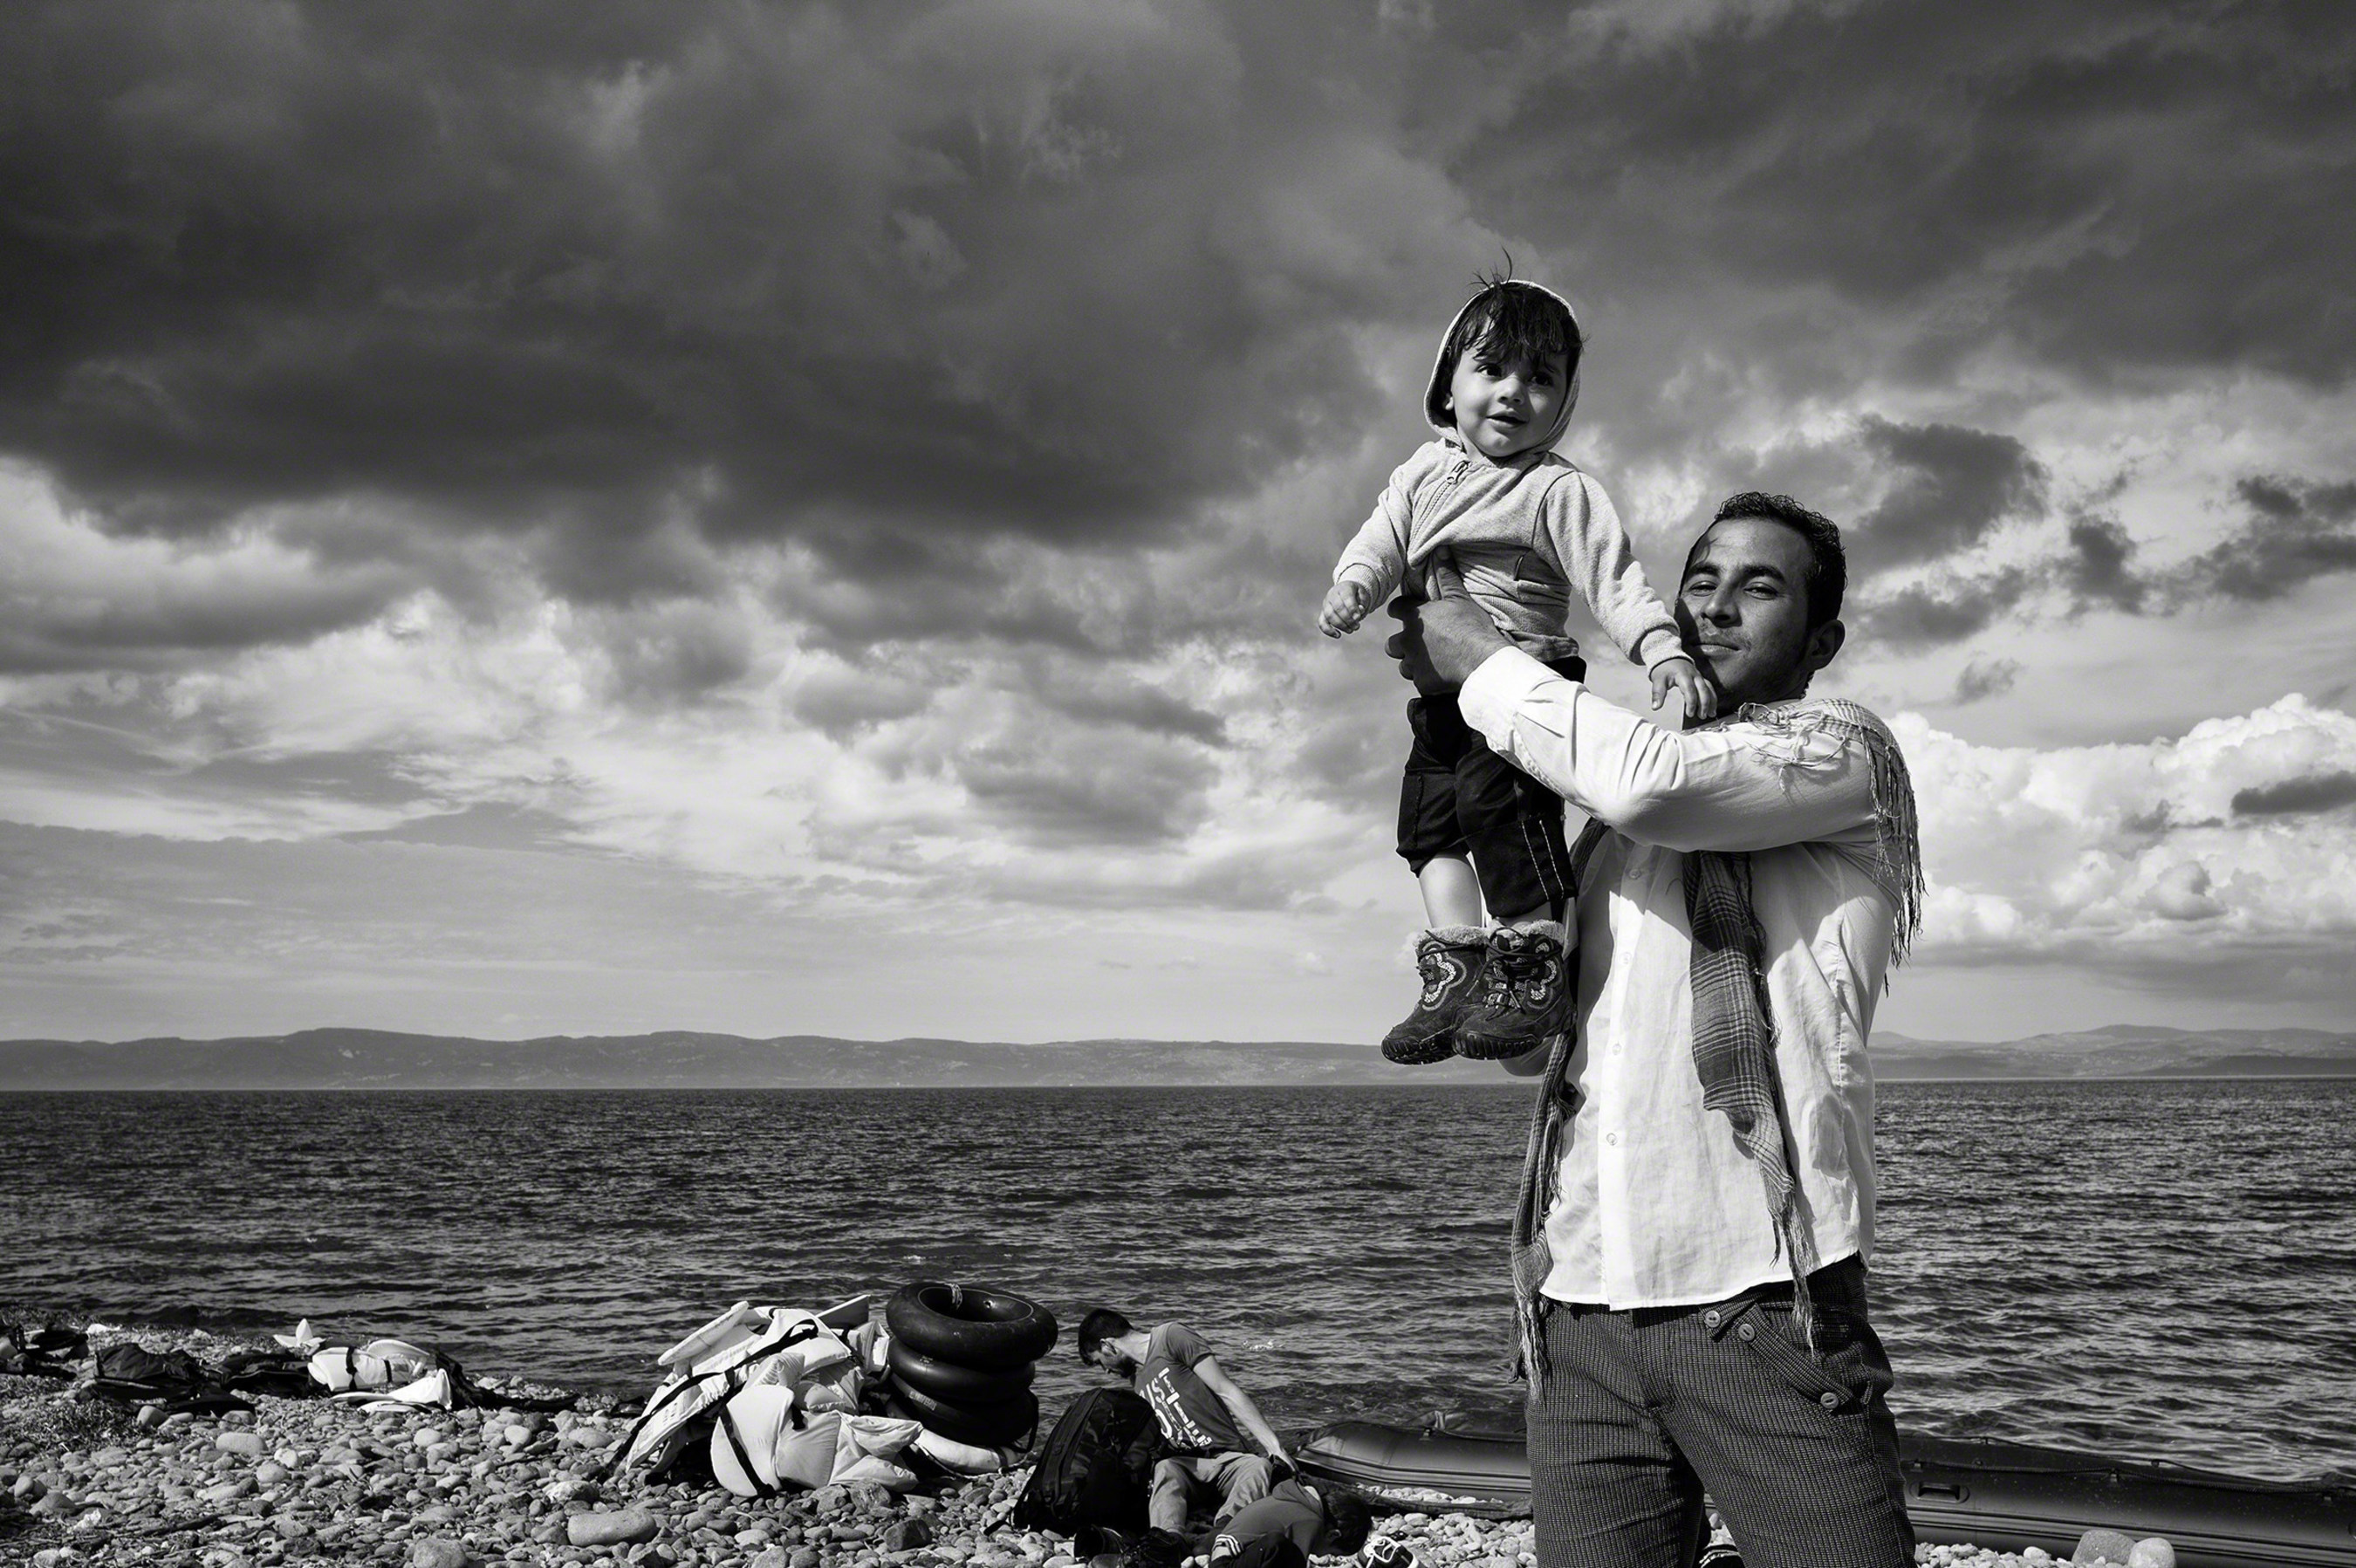 A father celebrates his family's safe passage to Lesbos after a stormy crossing over the Aegean Sea from Turkey. "REFUGEE," a groundbreaking exhibit that illuminates the plight of refugees through powerful and evocative photographs will open at the Newseum on Nov. 18. (C)Tom Stoddart